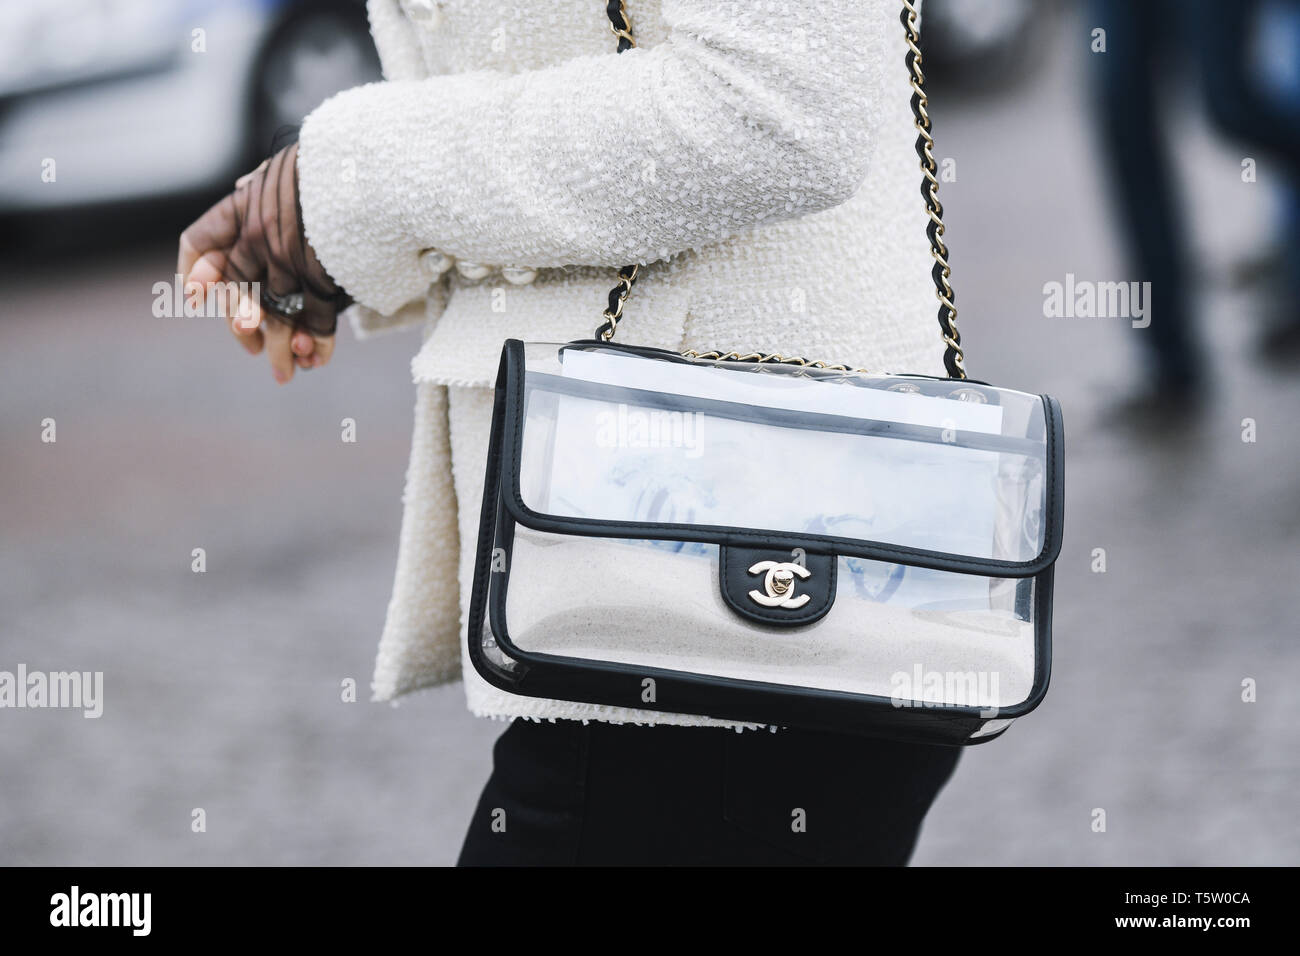 Paris, France - March 05, 2019: Street style outfit - Woman